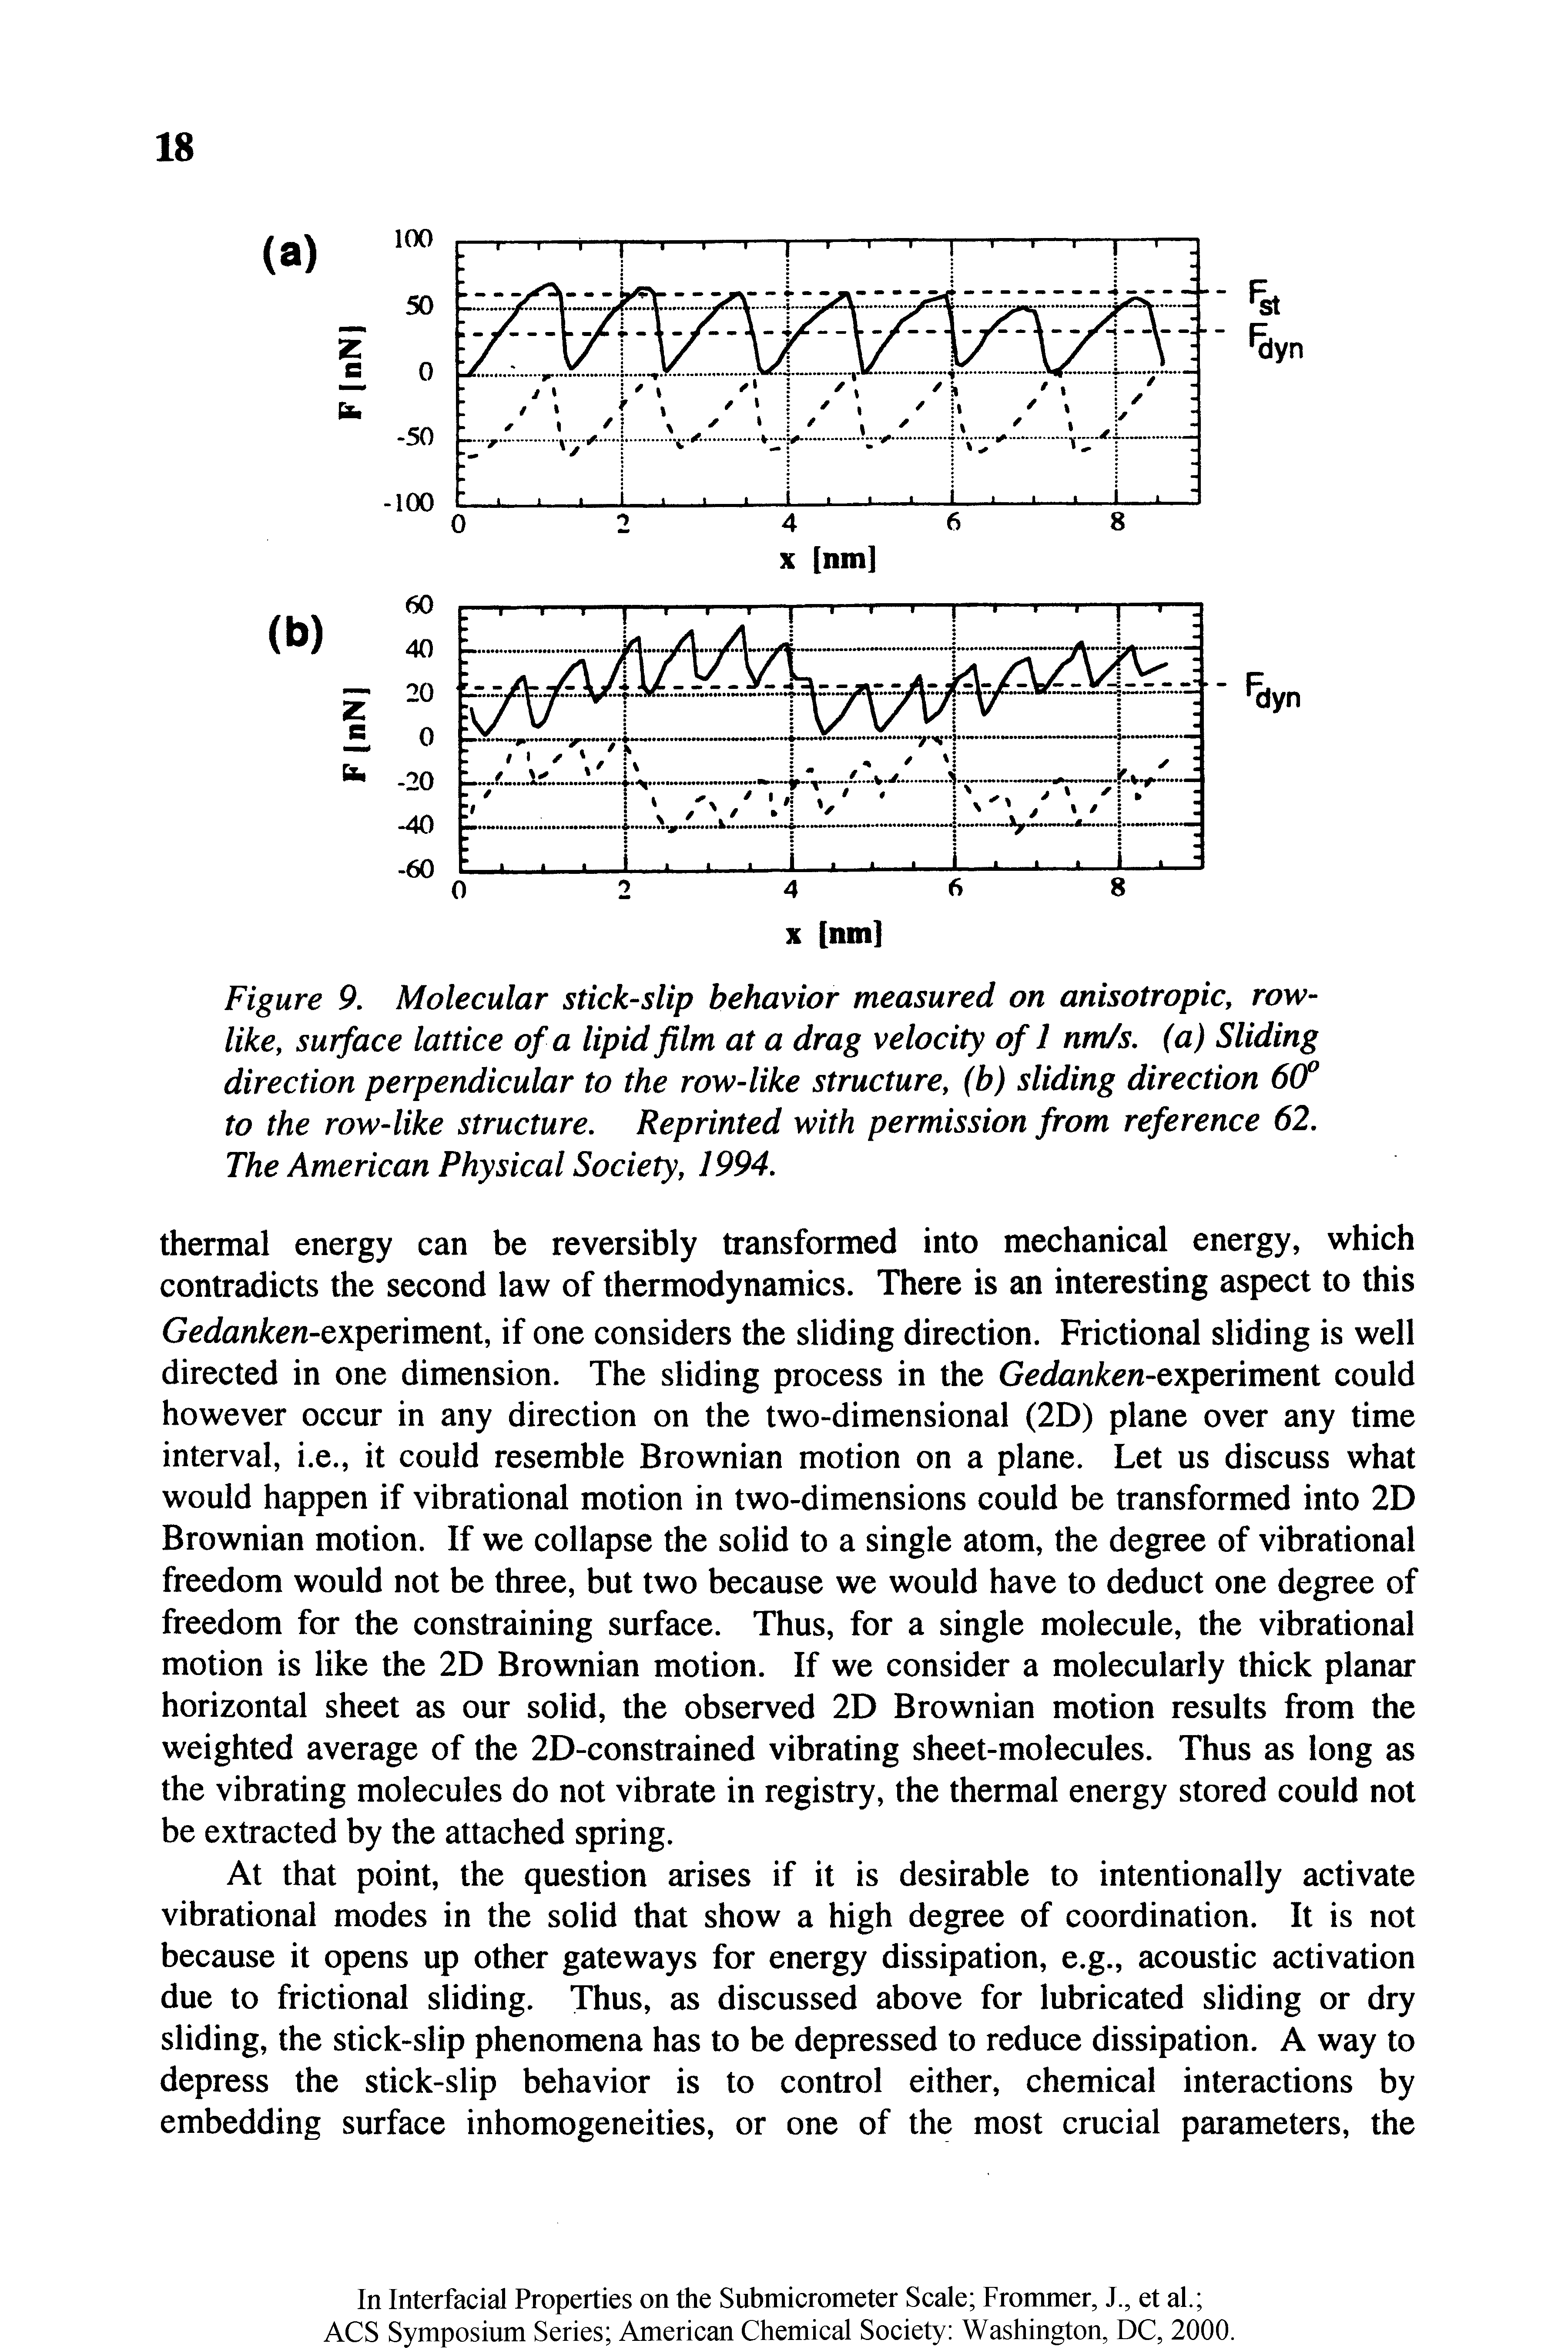 Figure 9. Molecular stick-slip behavior measured on anisotropic, rowlike, surface lattice of a lipid film at a drag velocity of 1 nm/s. (a) Sliding direction perpendicular to the row-like structure, (b) sliding direction 6(f to the row-like structure. Reprinted with permission from reference 62. The American Physical Society, 1994.